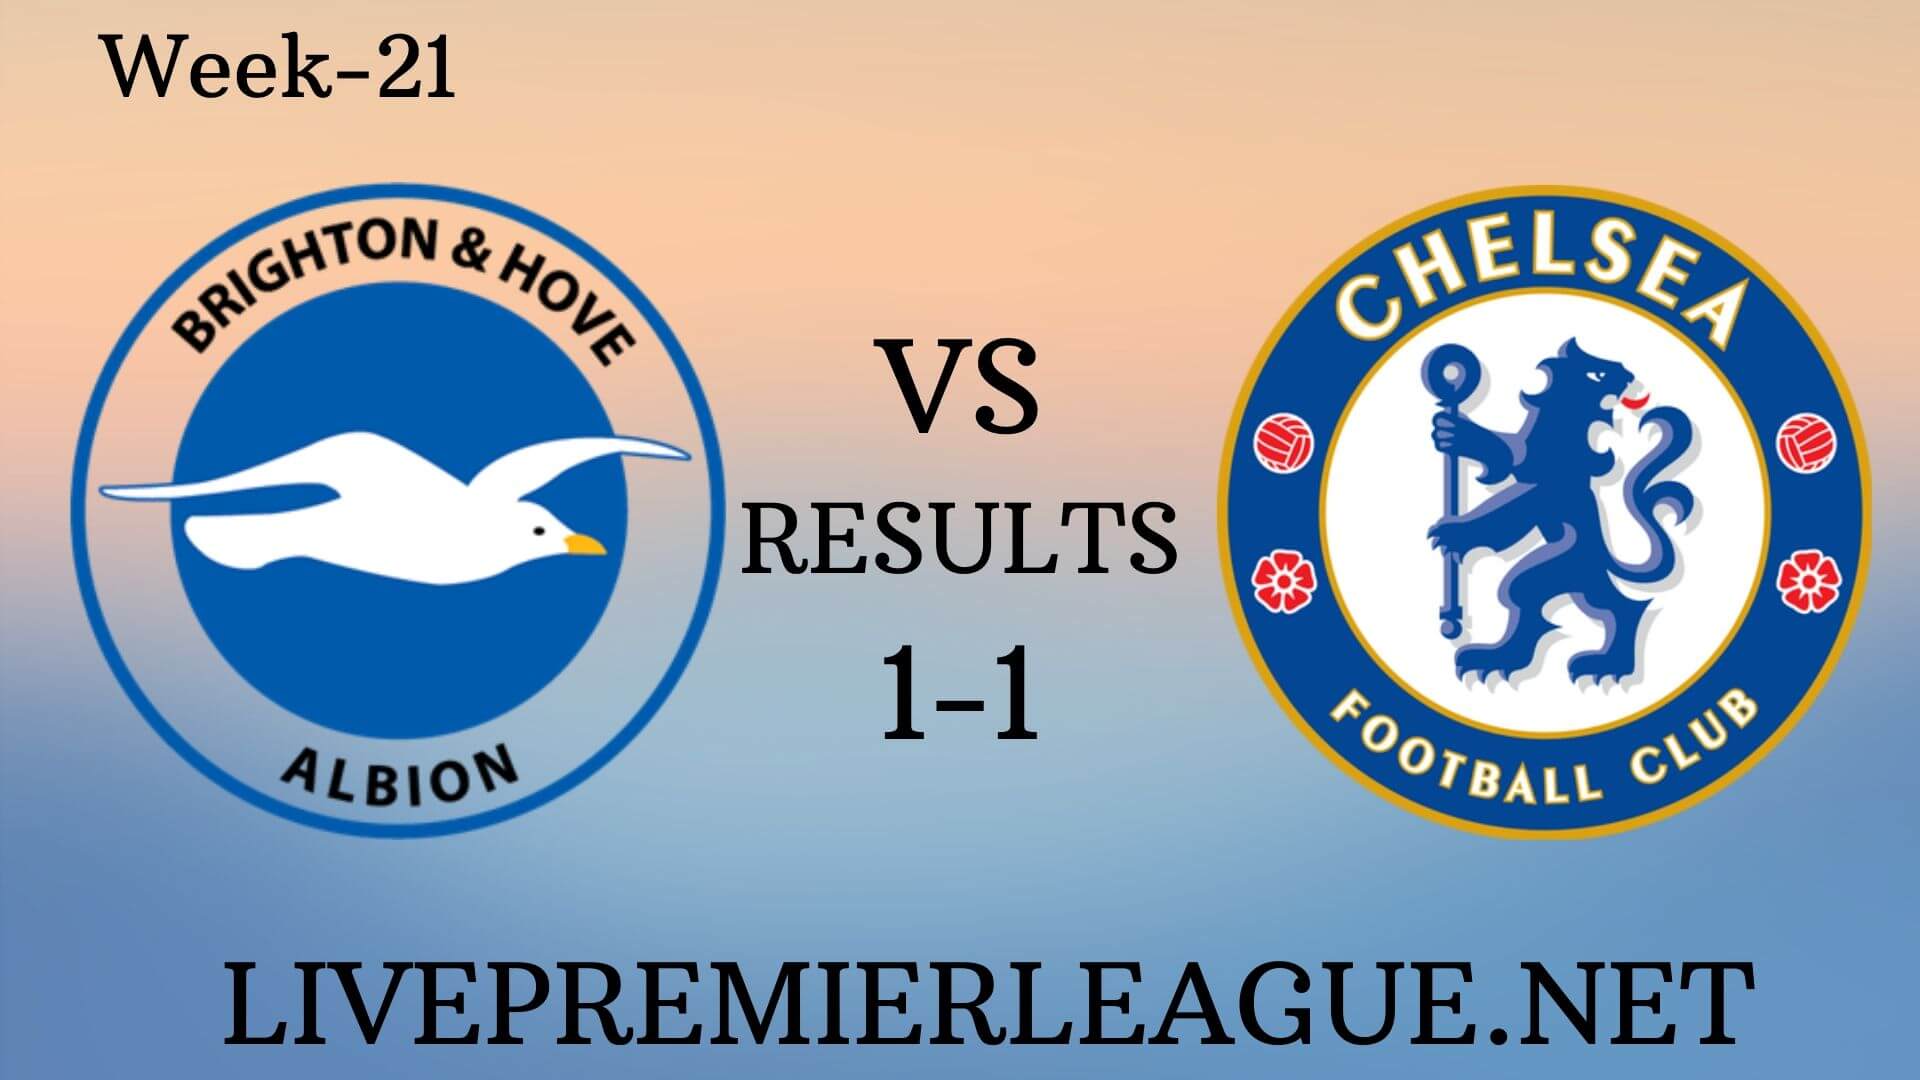 Brighton and Hove Albion Vs Chelsea | Week 21 Results 2019